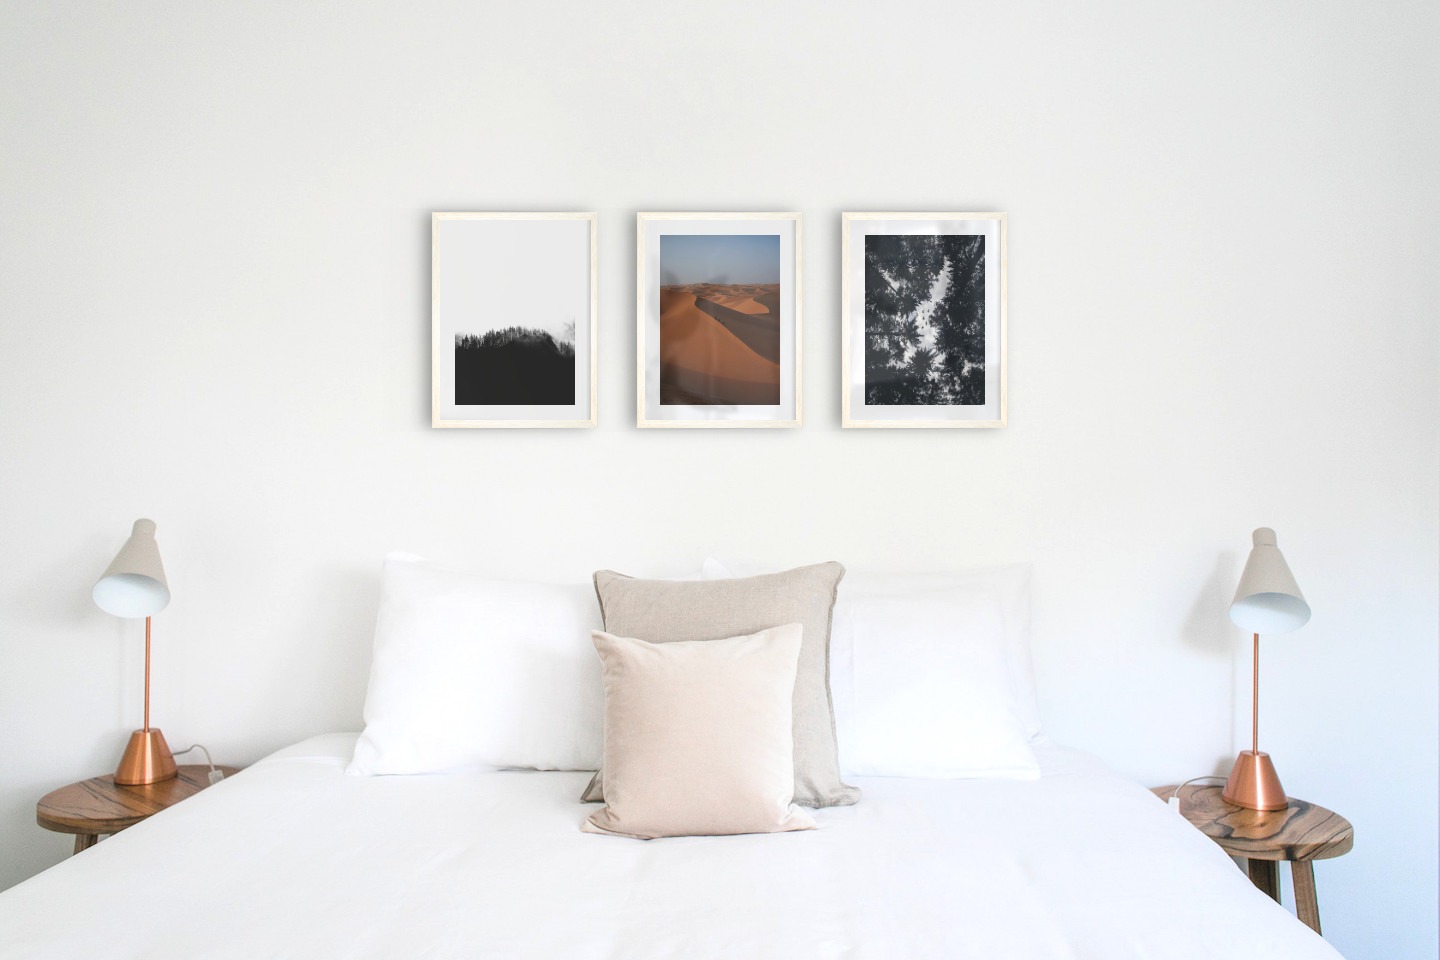 Gallery wall with picture frames in light wood in sizes 30x40 with prints "Wooden tops and fog", "Desert" and "Wooden tops and birds"